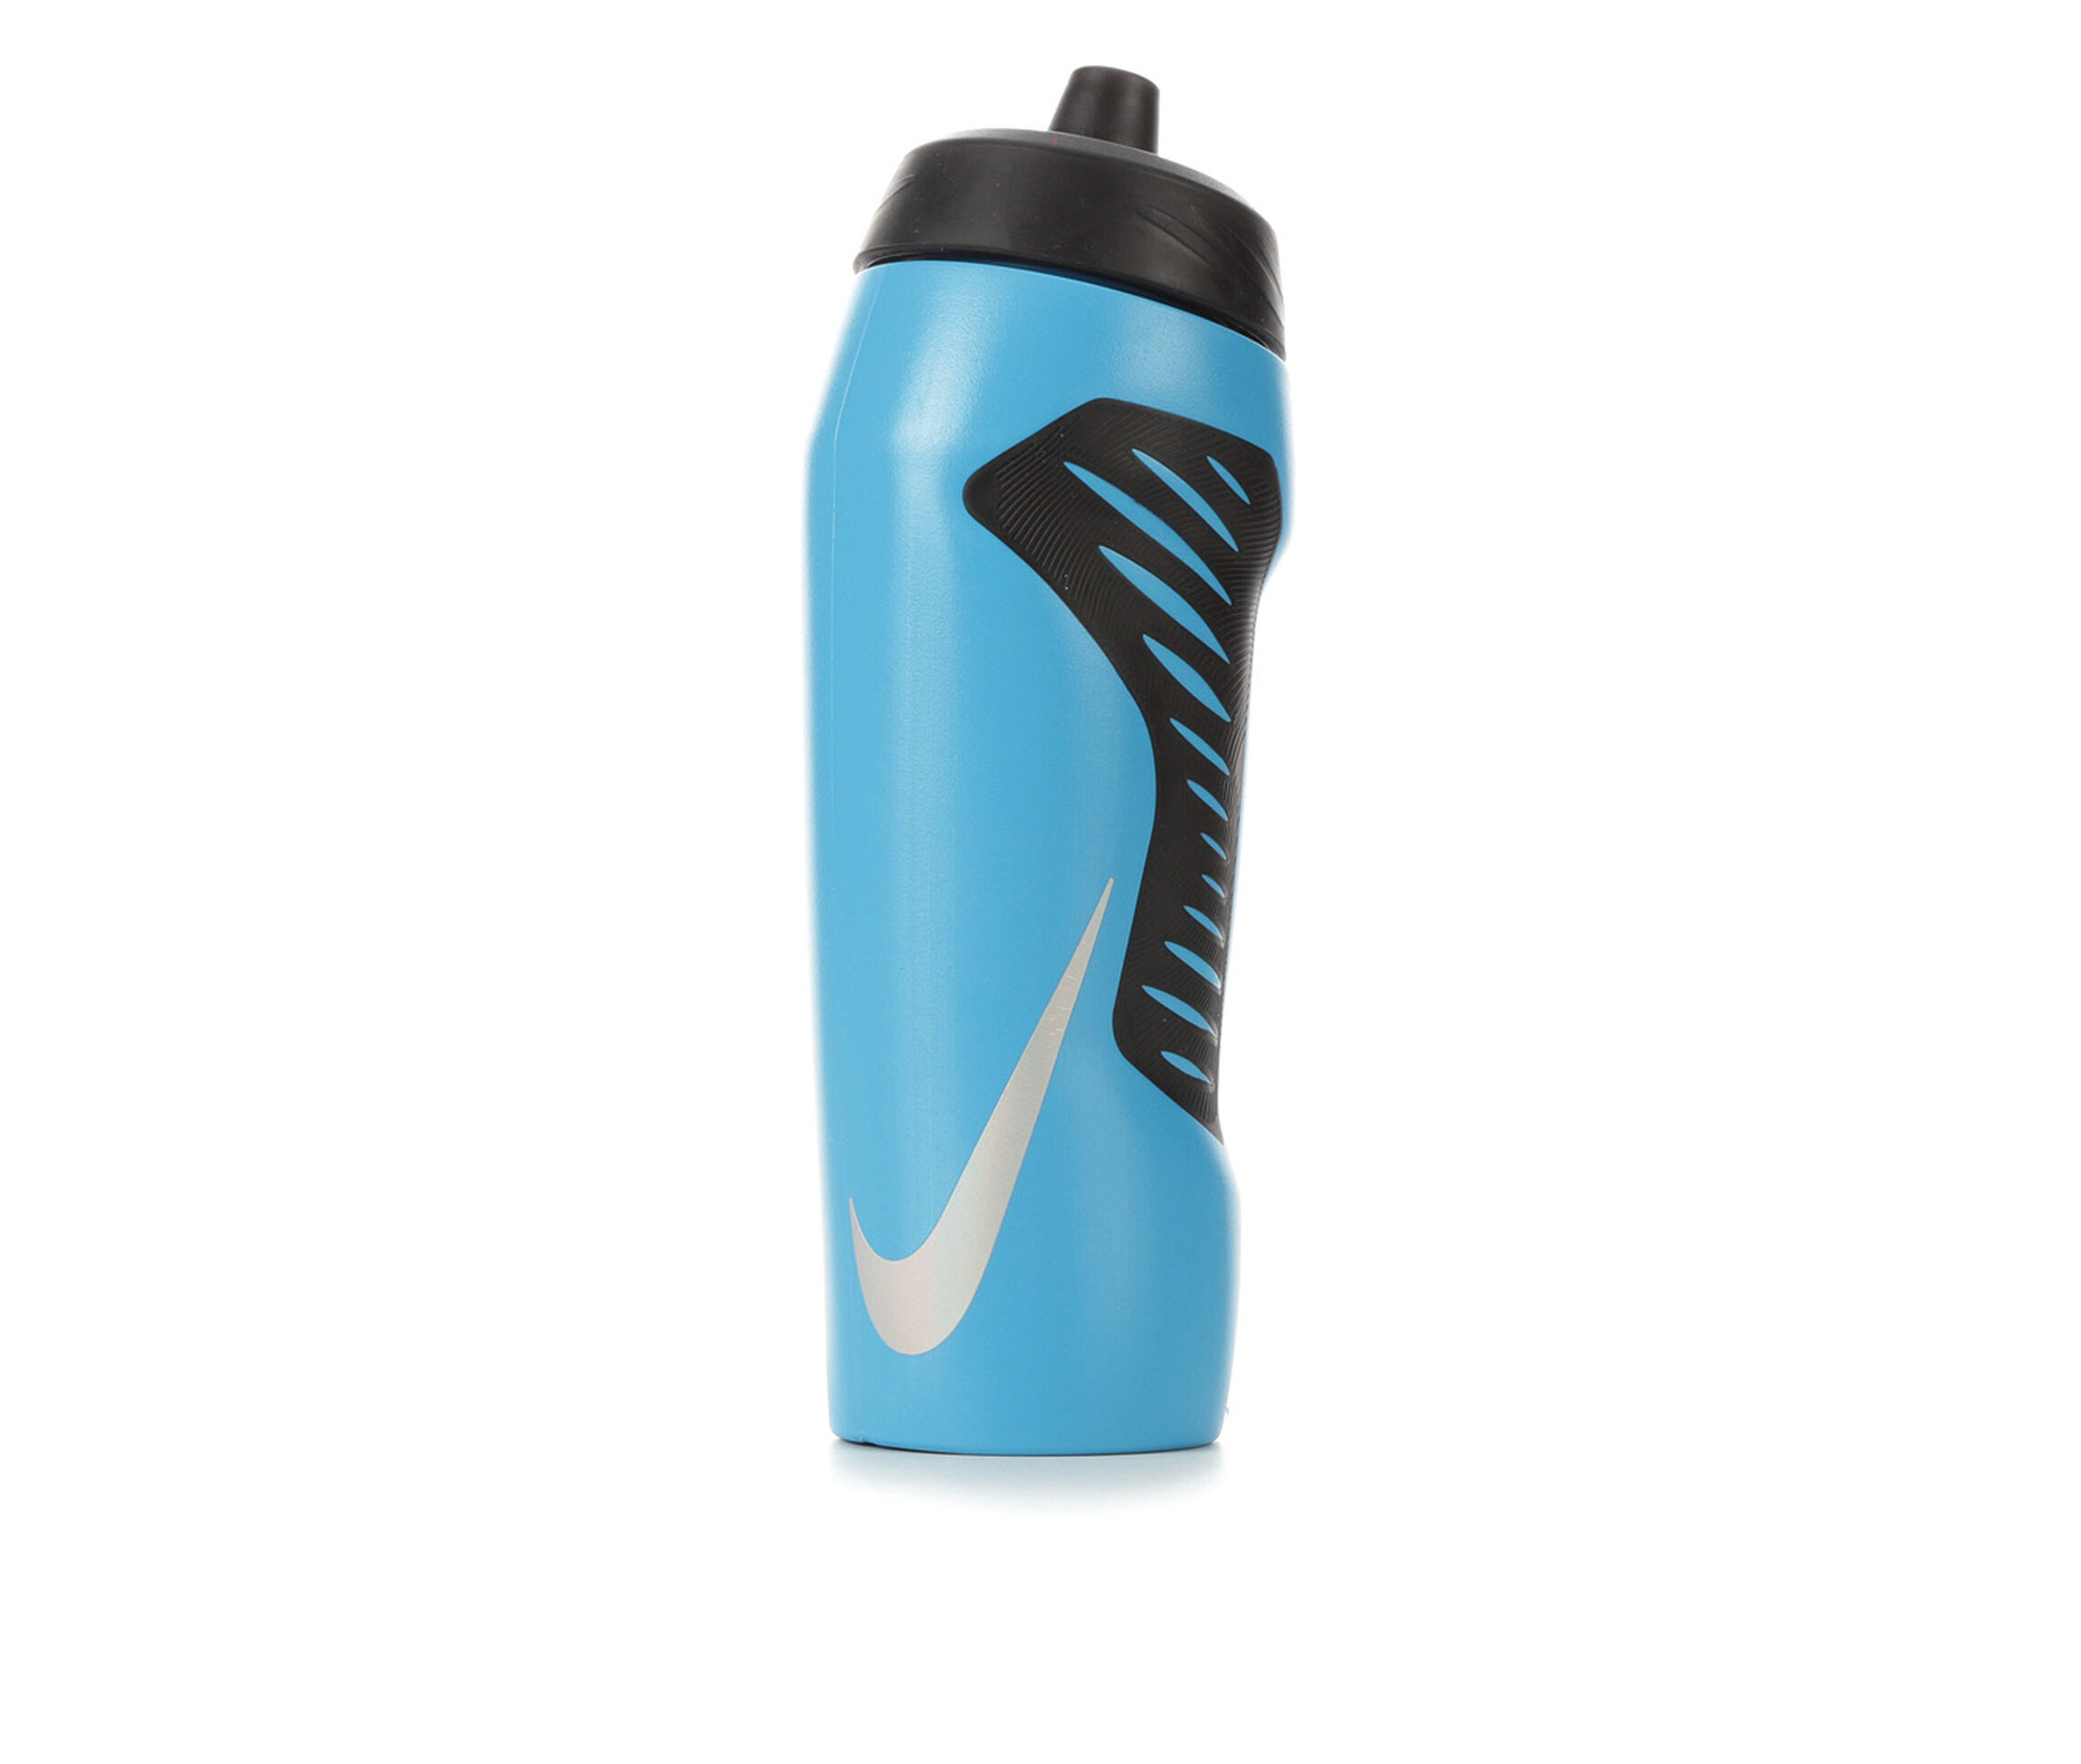 Shop Now For The Nike Hyperfuel Water Bottle 24oz | AccuWeather Shop